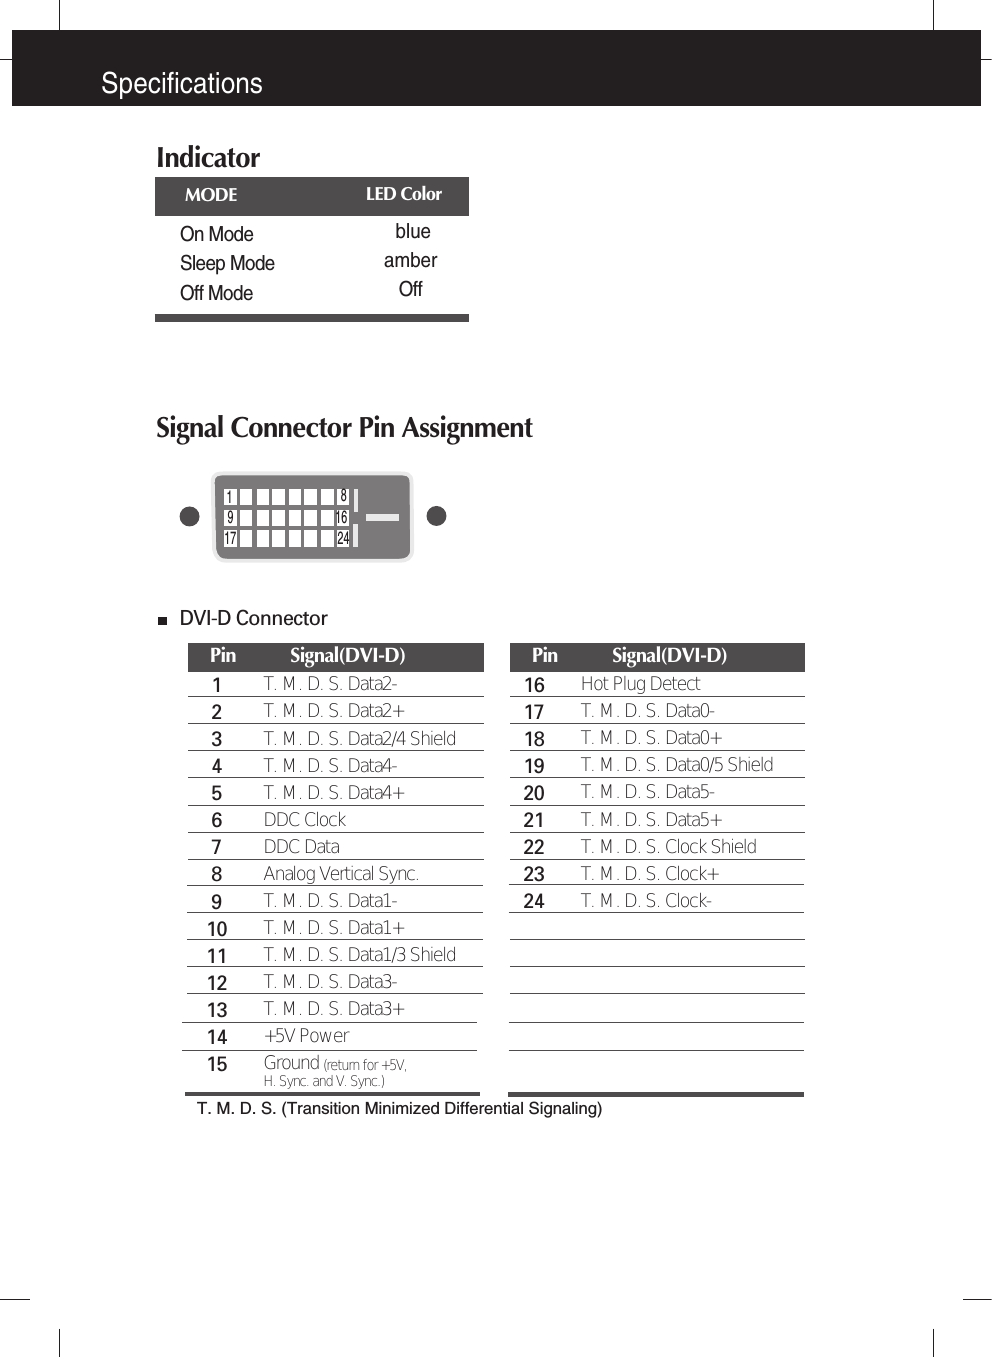 Signal Connector Pin Assignment18917 2416Pin           Signal(DVI-D)123456789101112131415T. M. D. S. Data2-T. M. D. S. Data2+T. M. D. S. Data2/4 ShieldT. M. D. S. Data4-T. M. D. S. Data4+DDC ClockDDC DataAnalog Vertical Sync.T. M. D. S. Data1-T. M. D. S. Data1+T. M. D. S. Data1/3 ShieldT. M. D. S. Data3-T. M. D. S. Data3++5V PowerGround (return for +5V, H. Sync. and V. Sync.)Pin           Signal(DVI-D)161718192021222324Hot Plug DetectT. M. D. S. Data0-T. M. D. S. Data0+T. M. D. S. Data0/5 ShieldT. M. D. S. Data5-T. M. D. S. Data5+T. M. D. S. Clock ShieldT. M. D. S. Clock+T. M. D. S. Clock-T. M. D. S. (Transition Minimized Differential Signaling)DVI-D Connector SpecificationsIndicatorOn ModeSleep ModeOff ModeblueamberOffLED ColorMODE